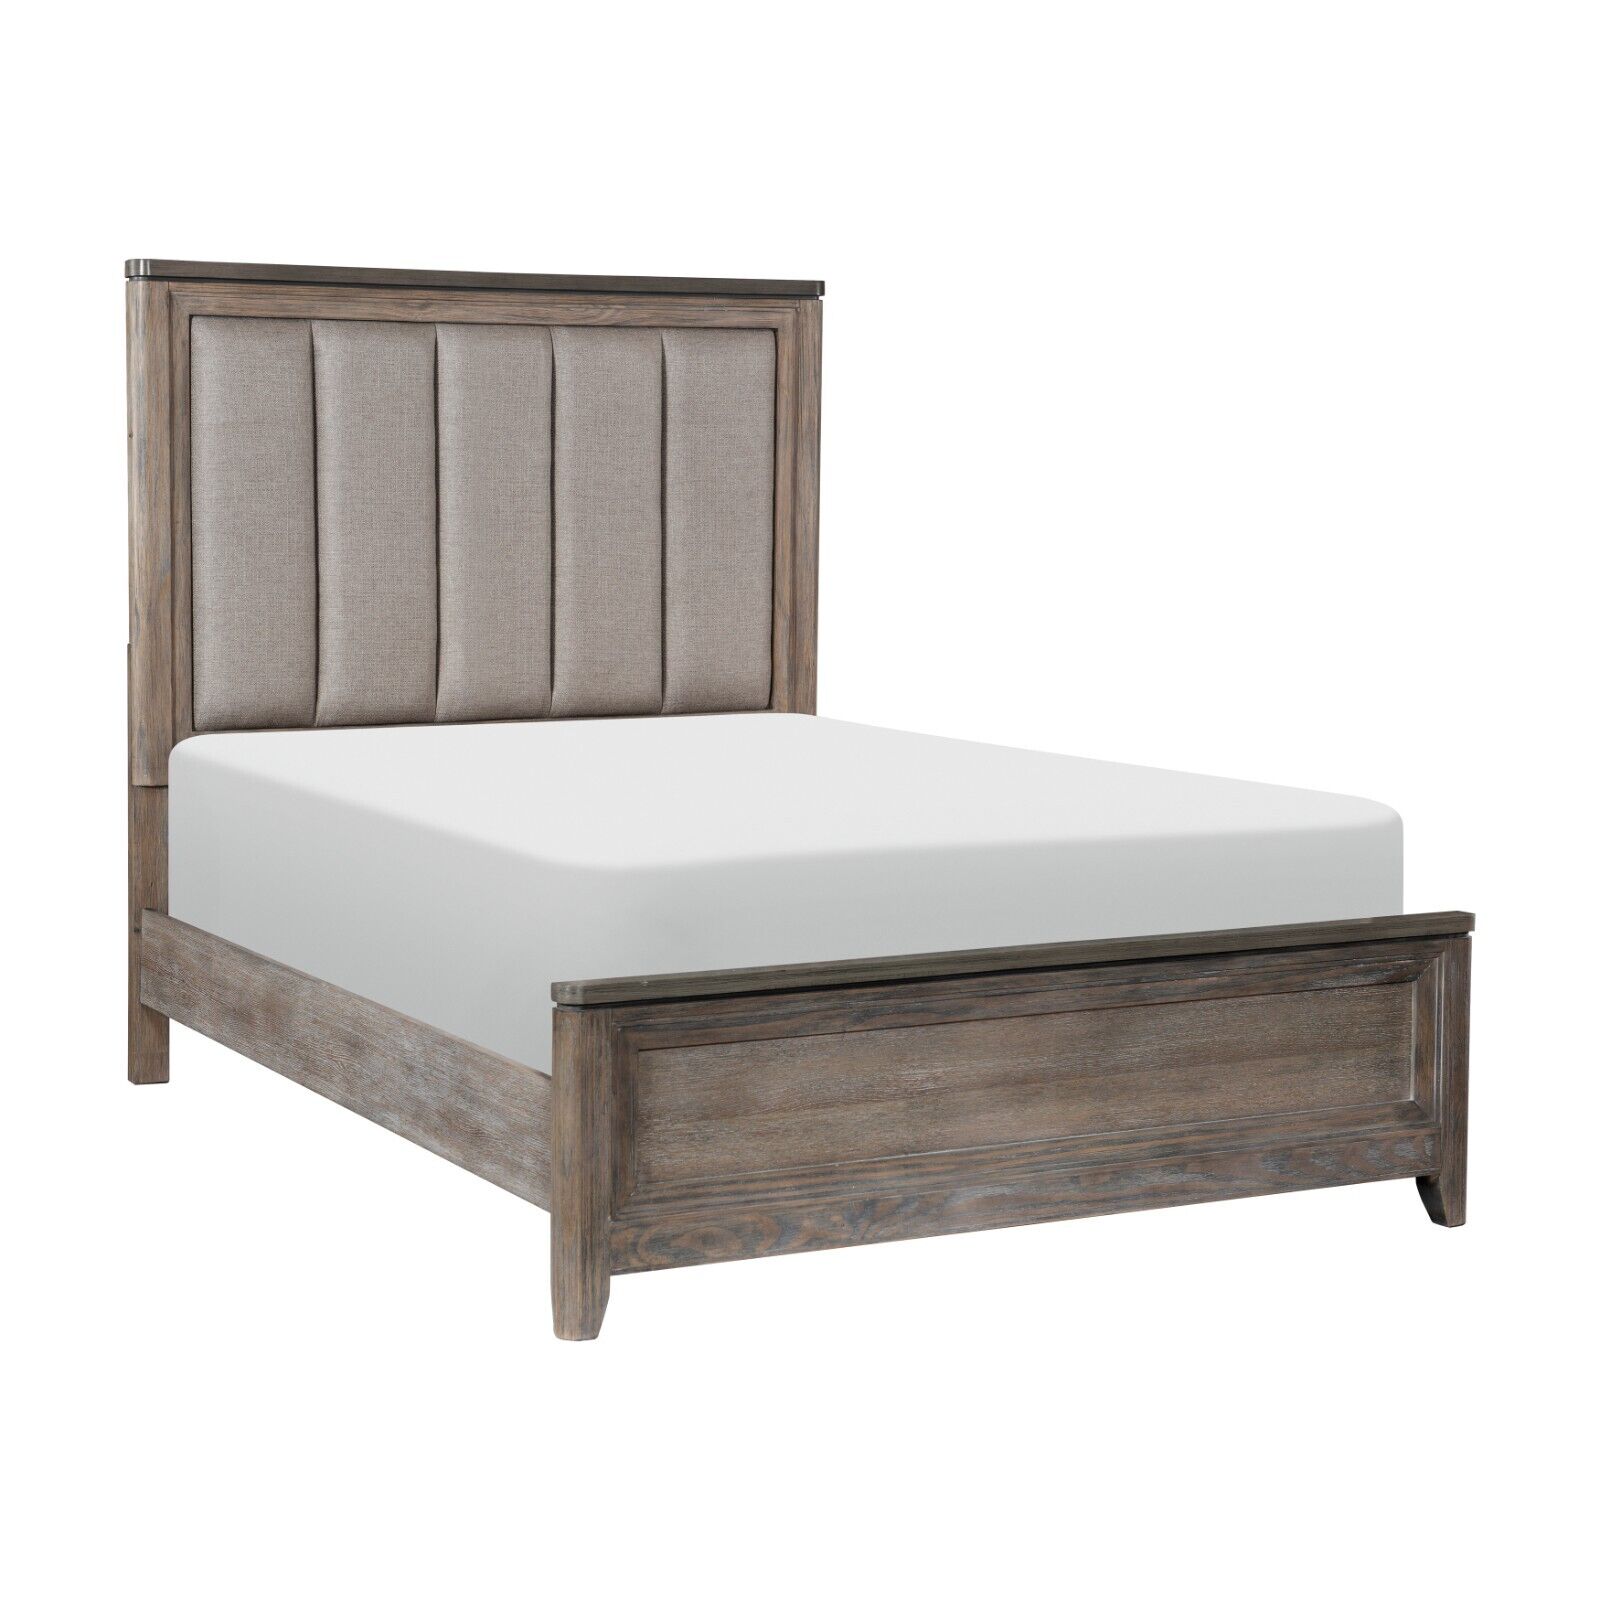 Esofastore Transitional Style 1pc Queen Size Bed Upholstered Fabric Padded Headboard Oak Veneer Wood Bedroom Furniture